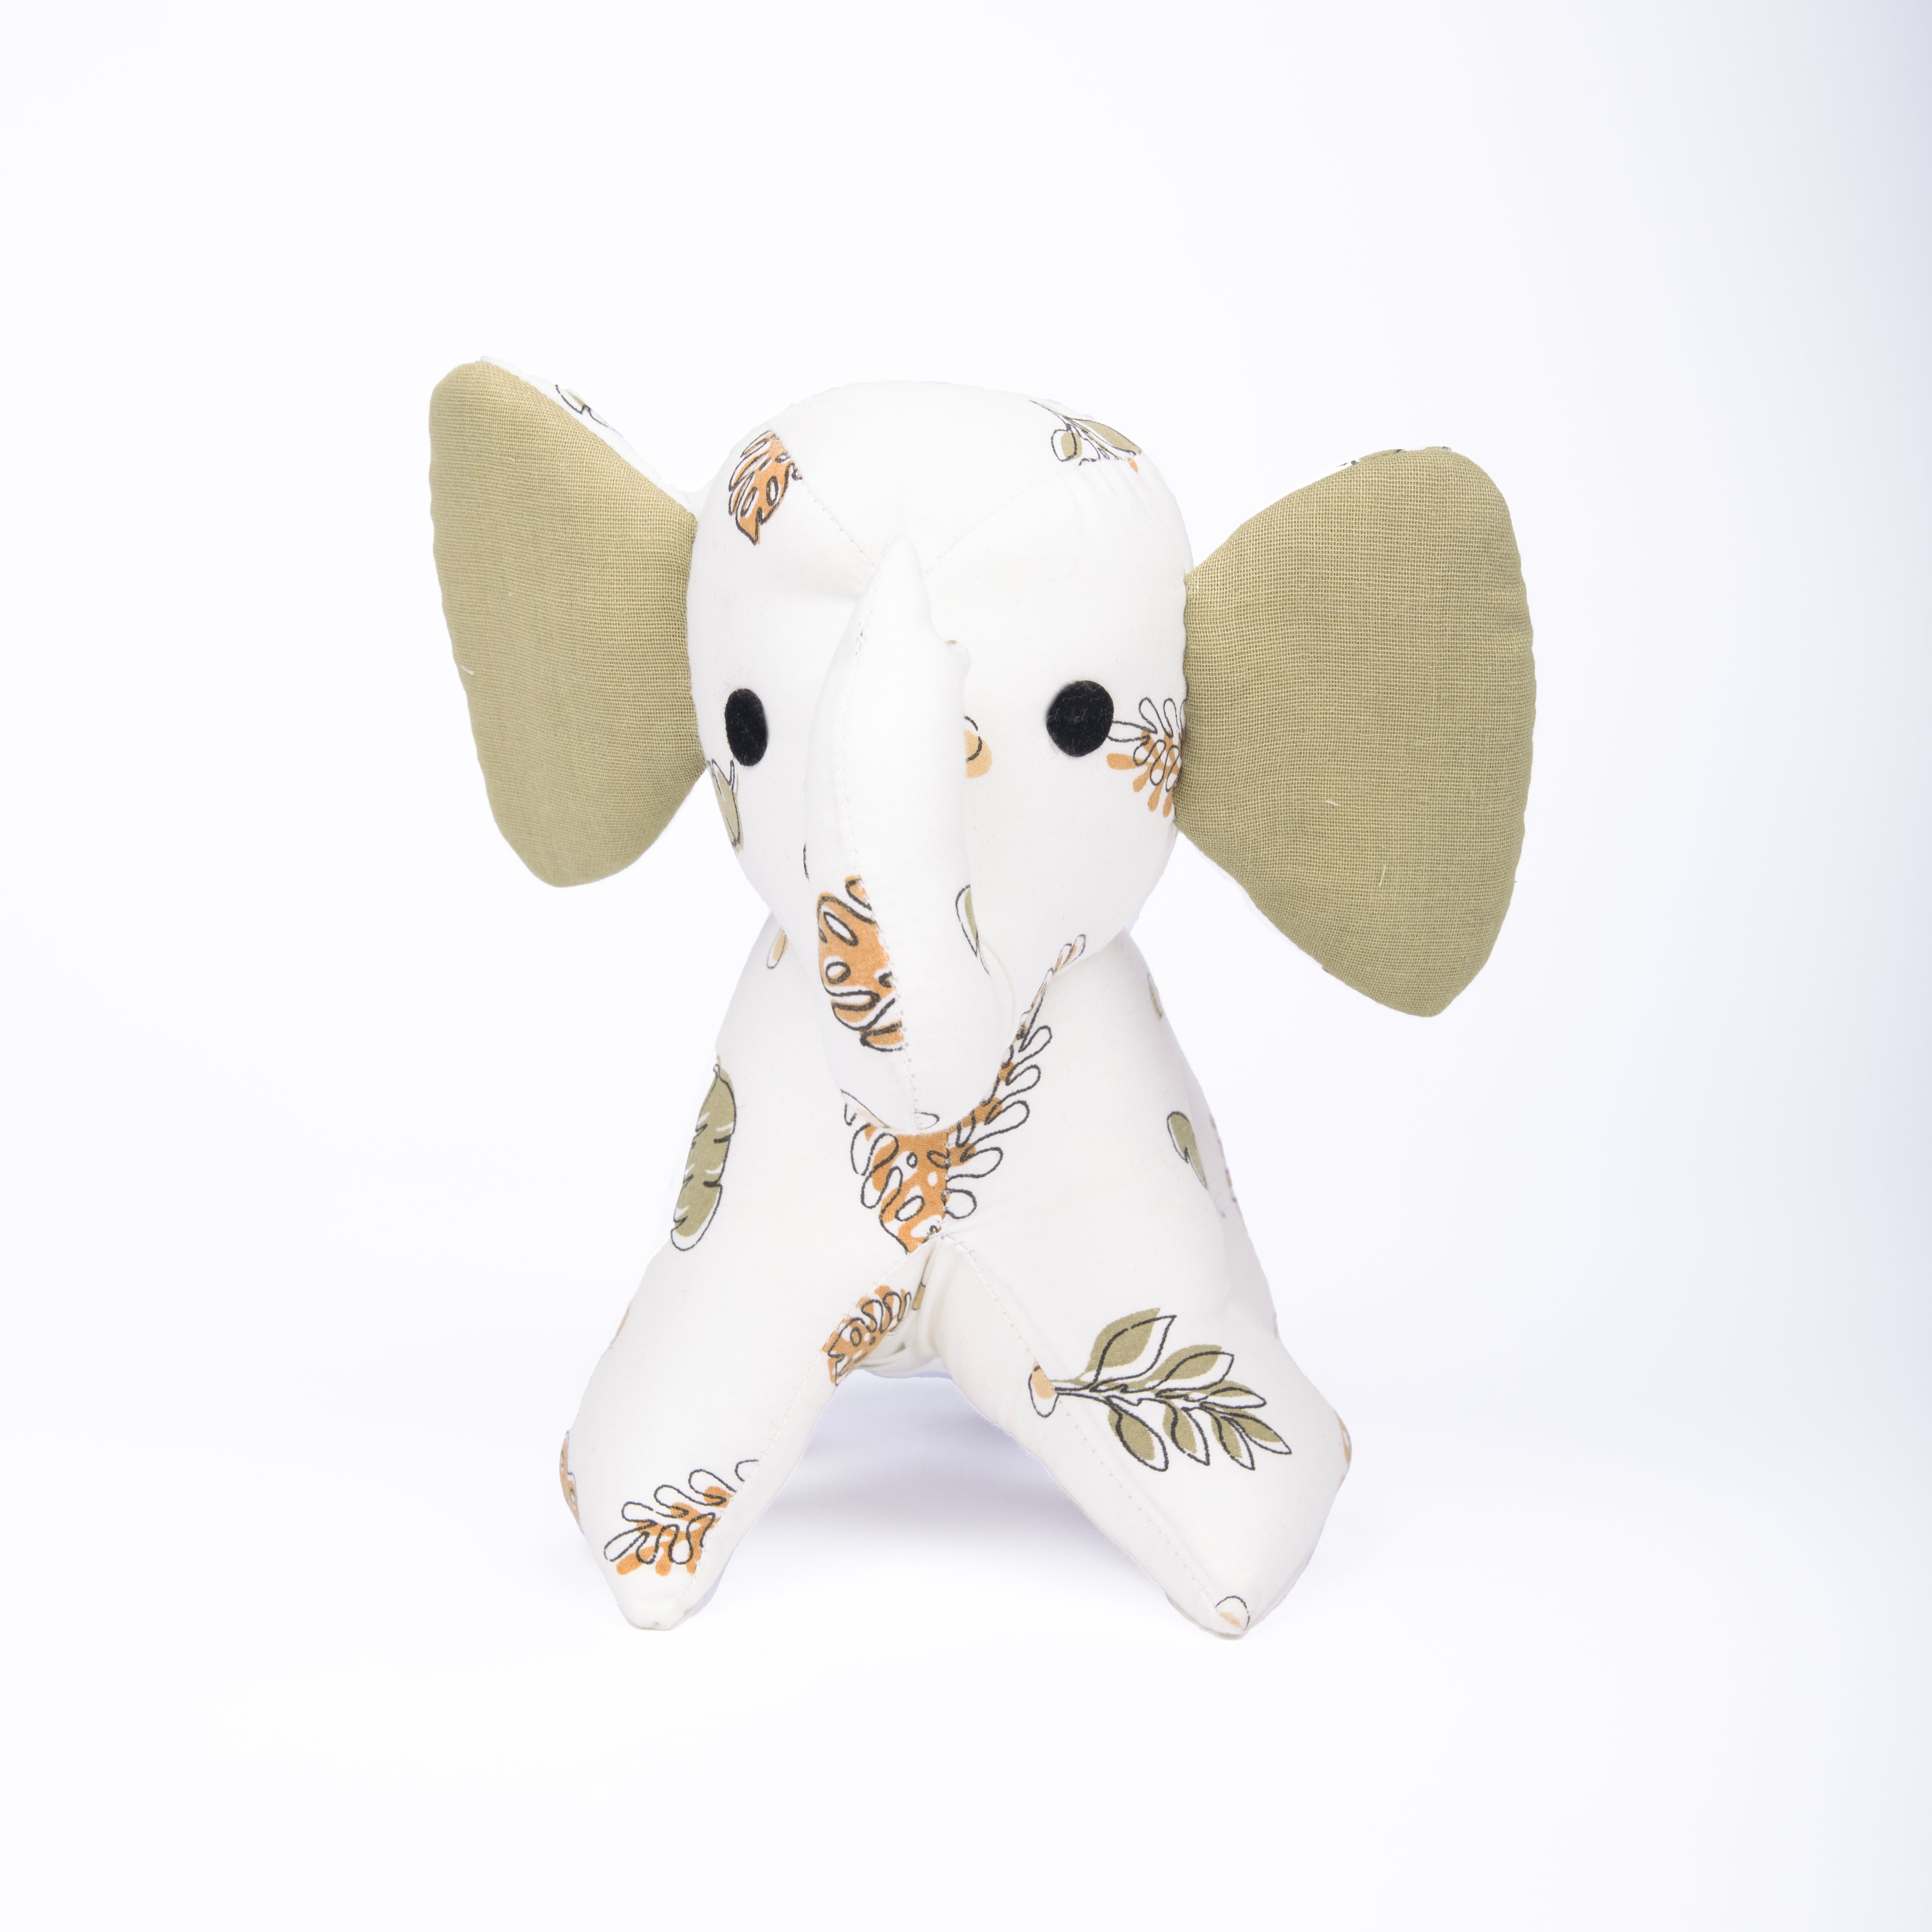 Organic Cotton & Naturally Dyed Soft Toy | Zola The Elephant